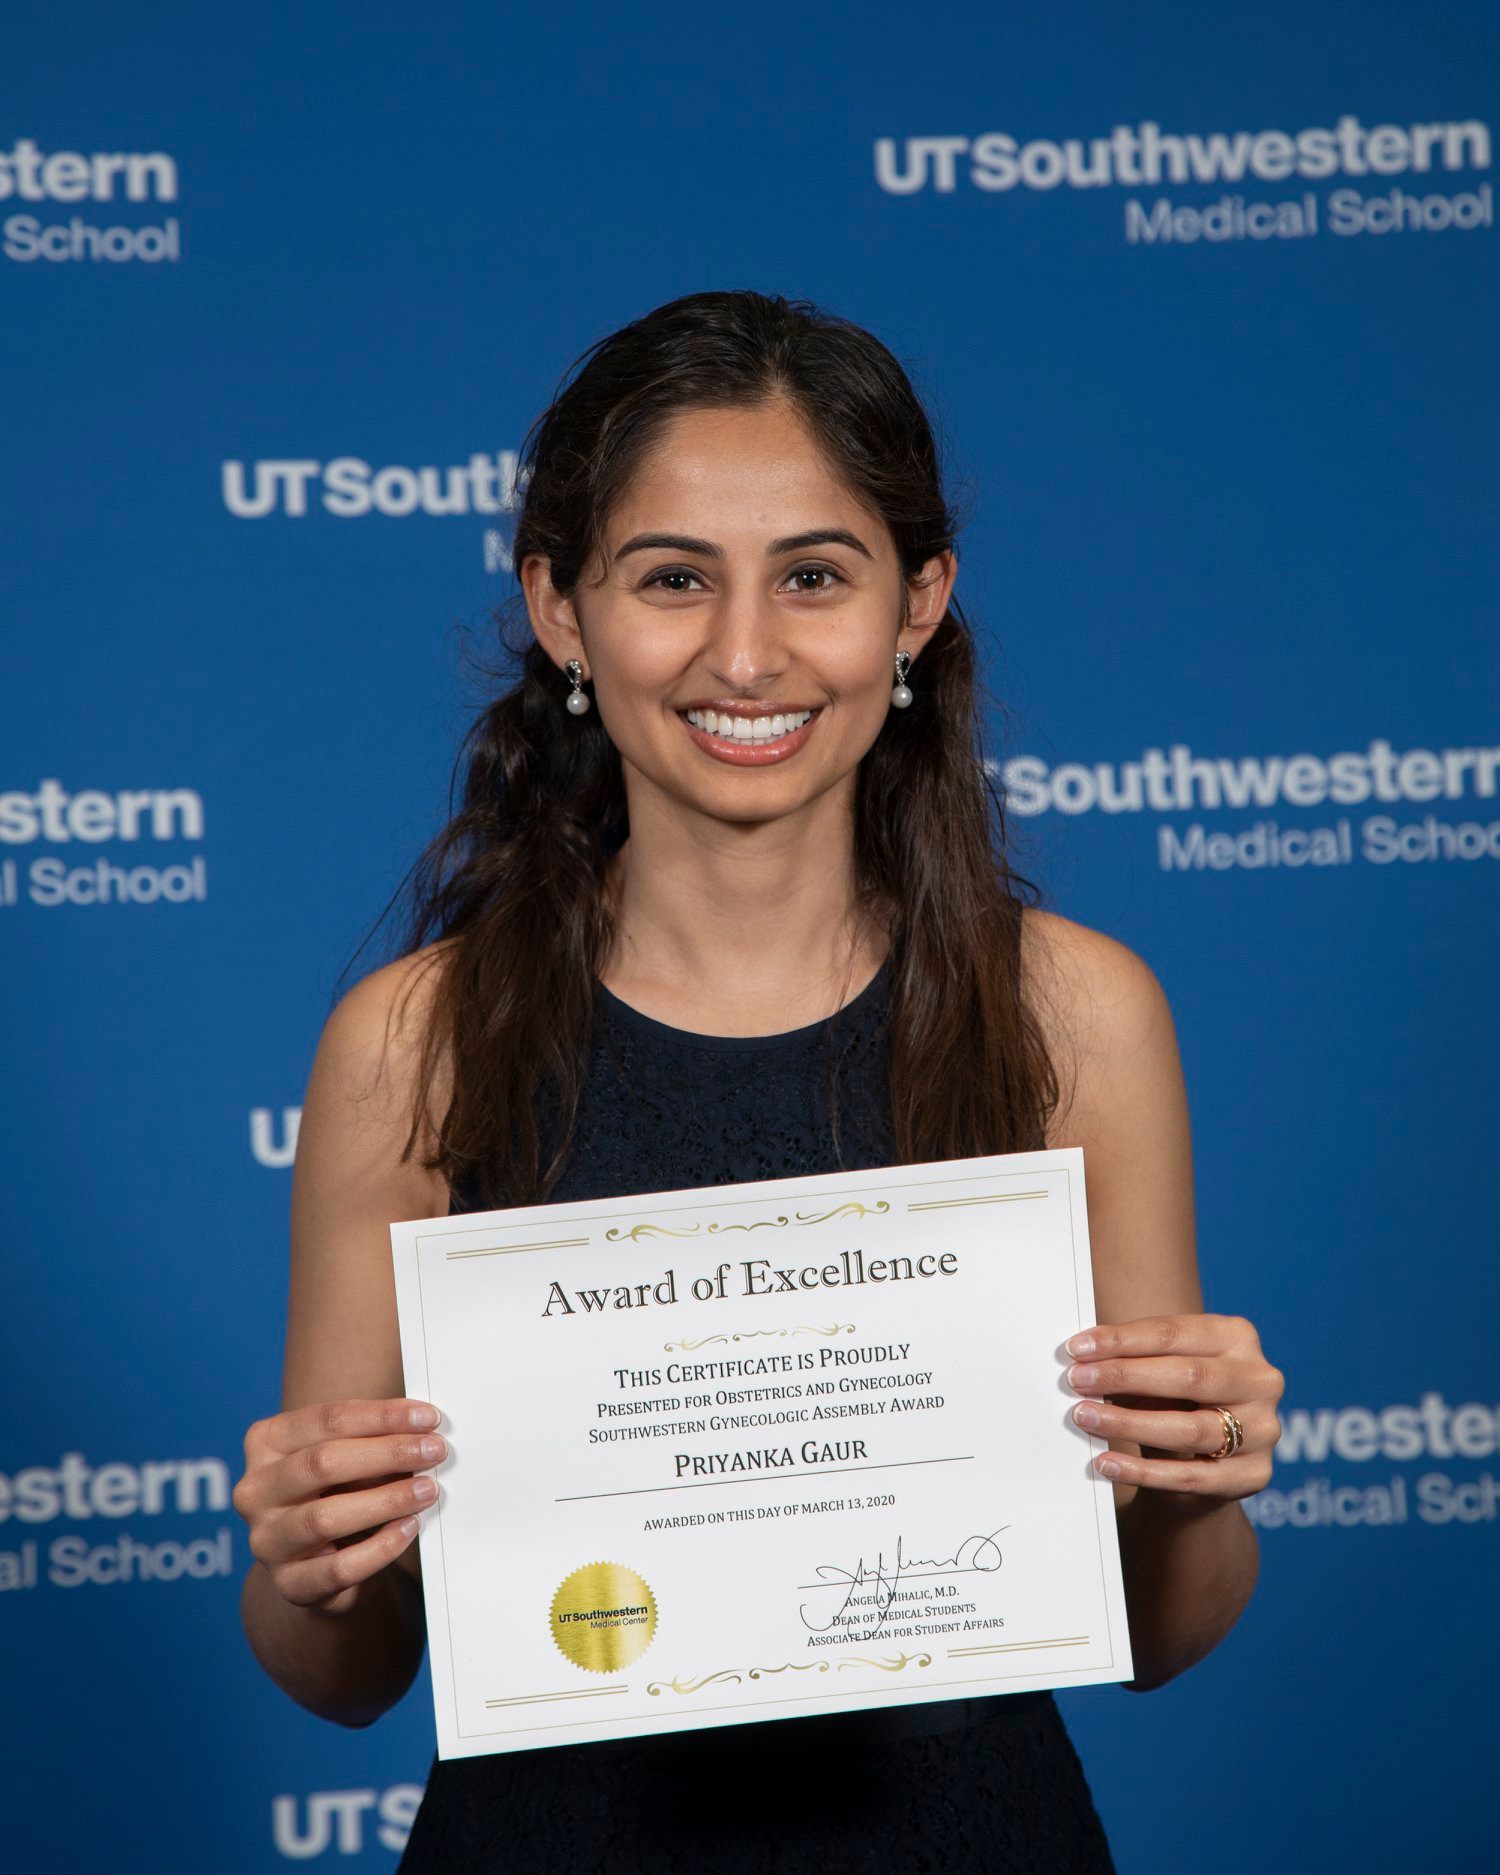 Priyanks Gaur holding The Southwestern Gynecologic Assembly award wearing a black dress and small earrings